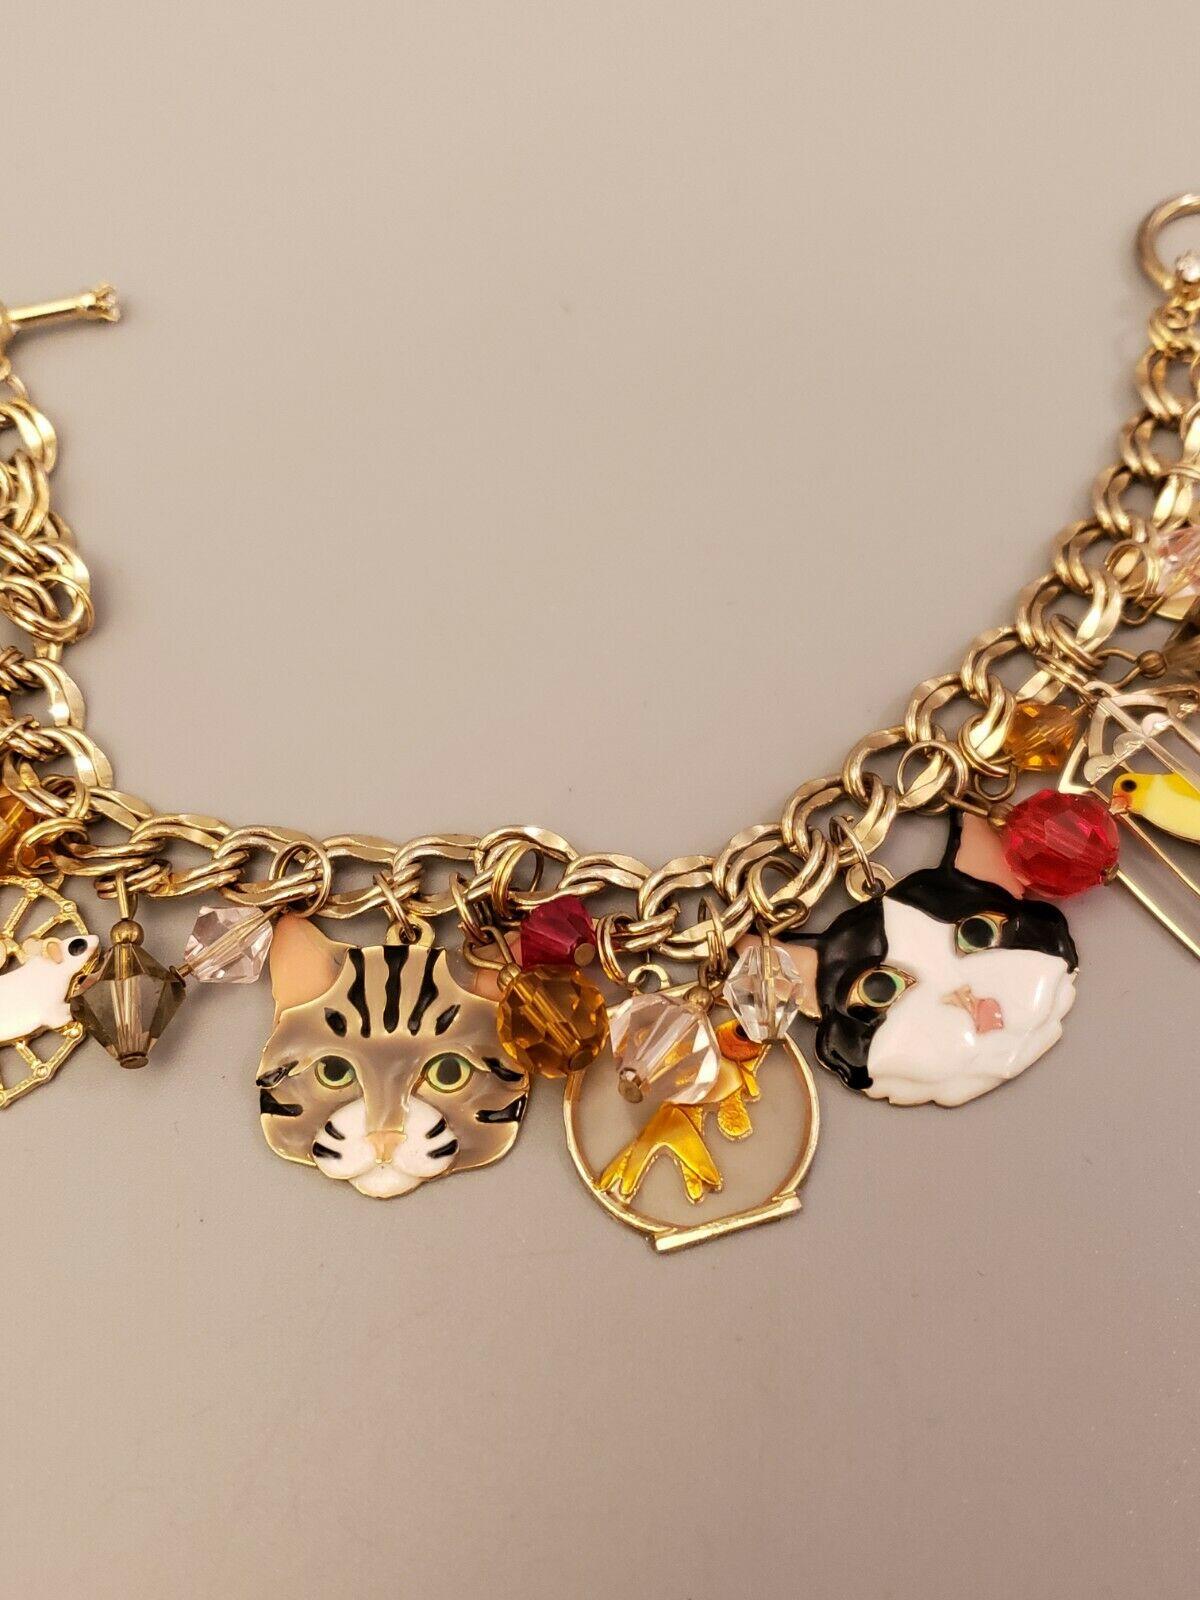 Delightful Vintage Signed Lunch at the Ritz Multi Charm Cat, Mouse and Bird in a Cage Bracelet. Enamel, Gold Tone. Approx. 7.5” Long. Excellent Condition. Chic and Fun to Wear…The perfect accessory for the Modern Sterling Silver Woman!  
